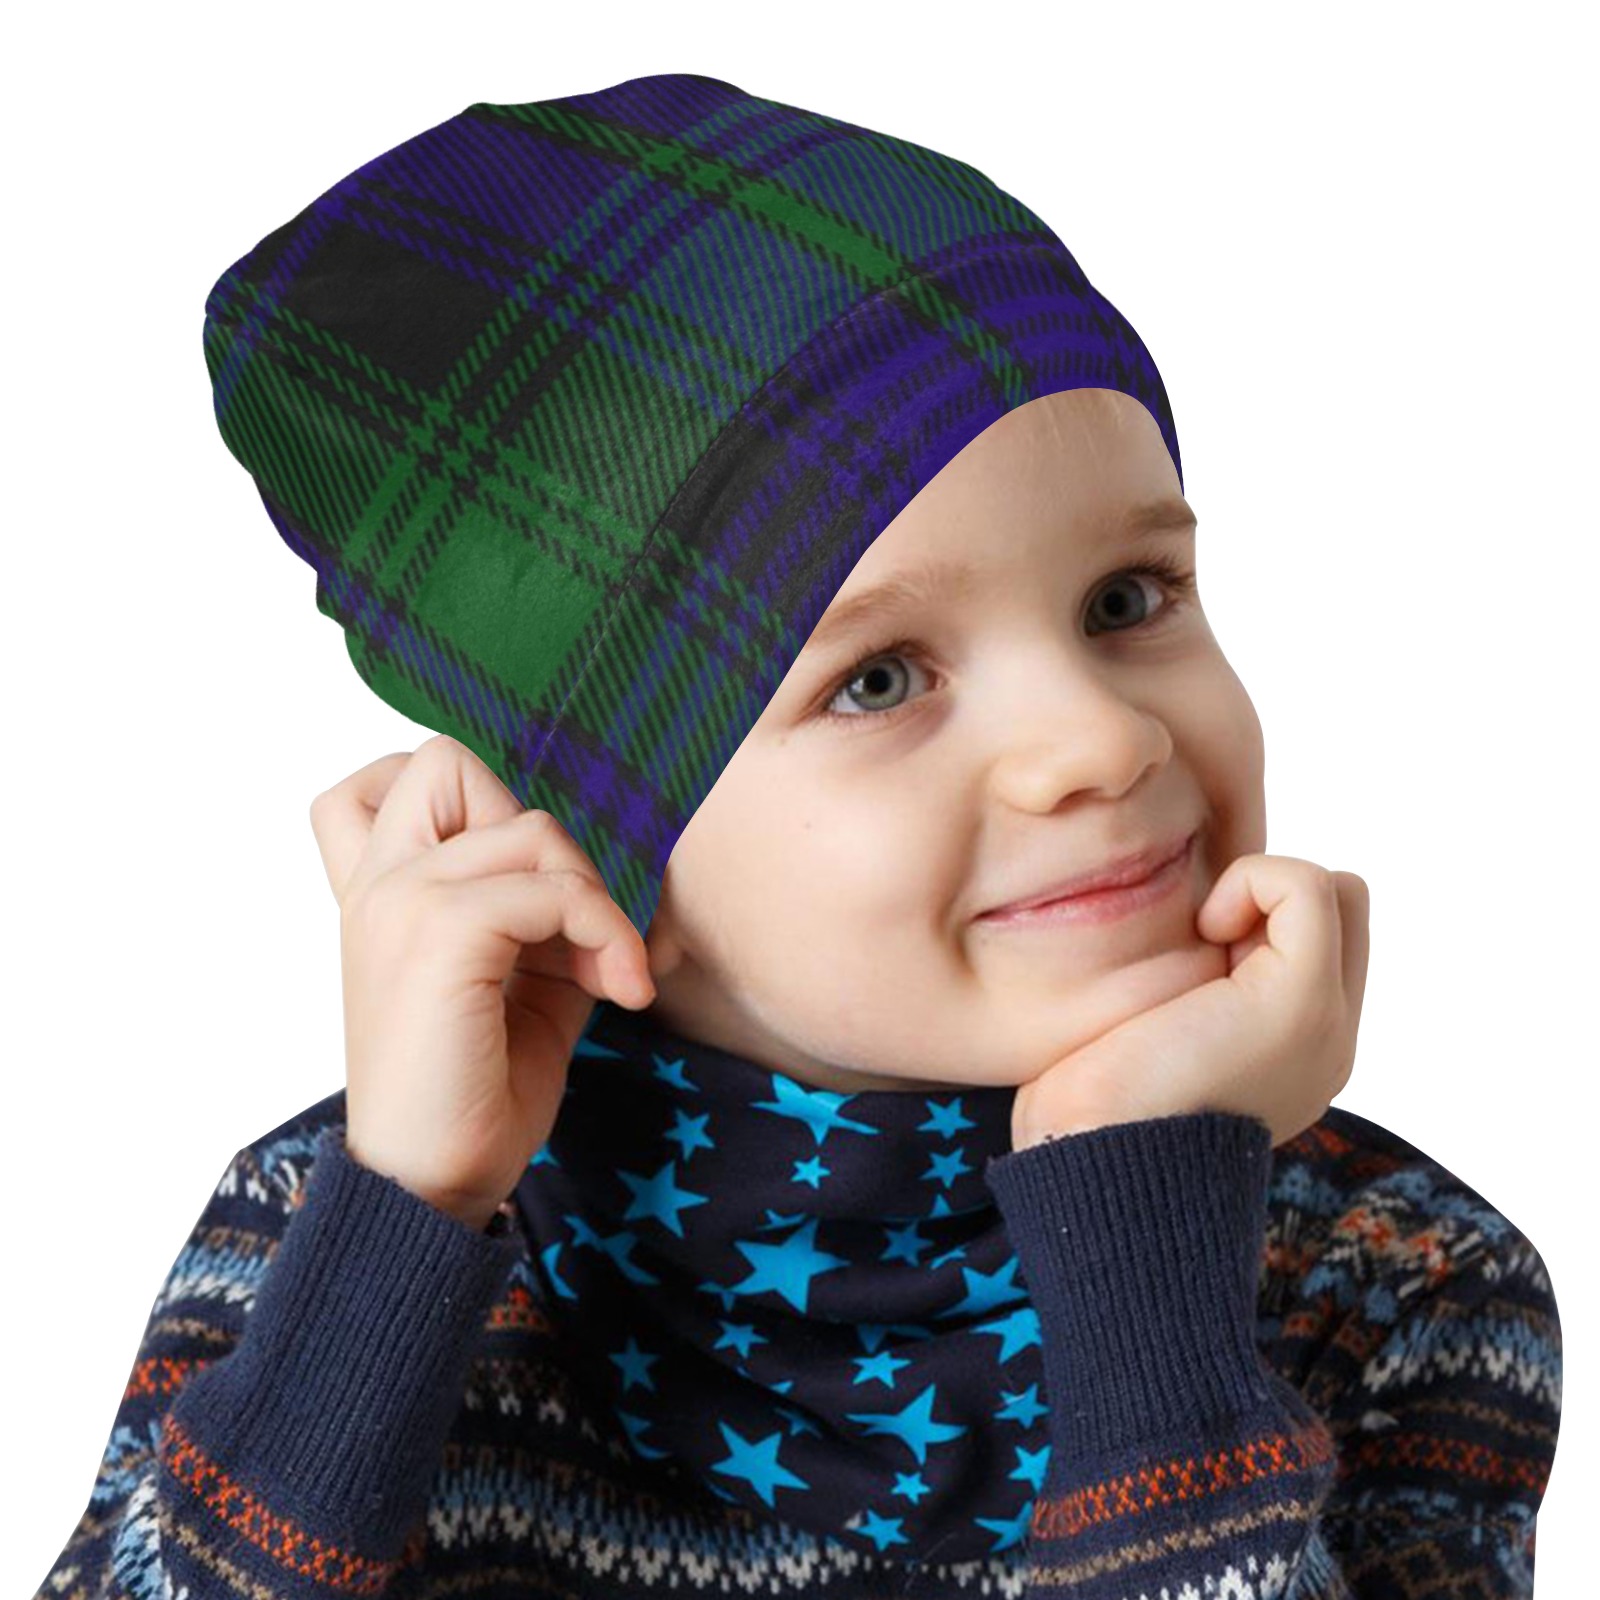 5TH. ROYAL SCOTS OF CANADA TARTAN All Over Print Beanie for Kids